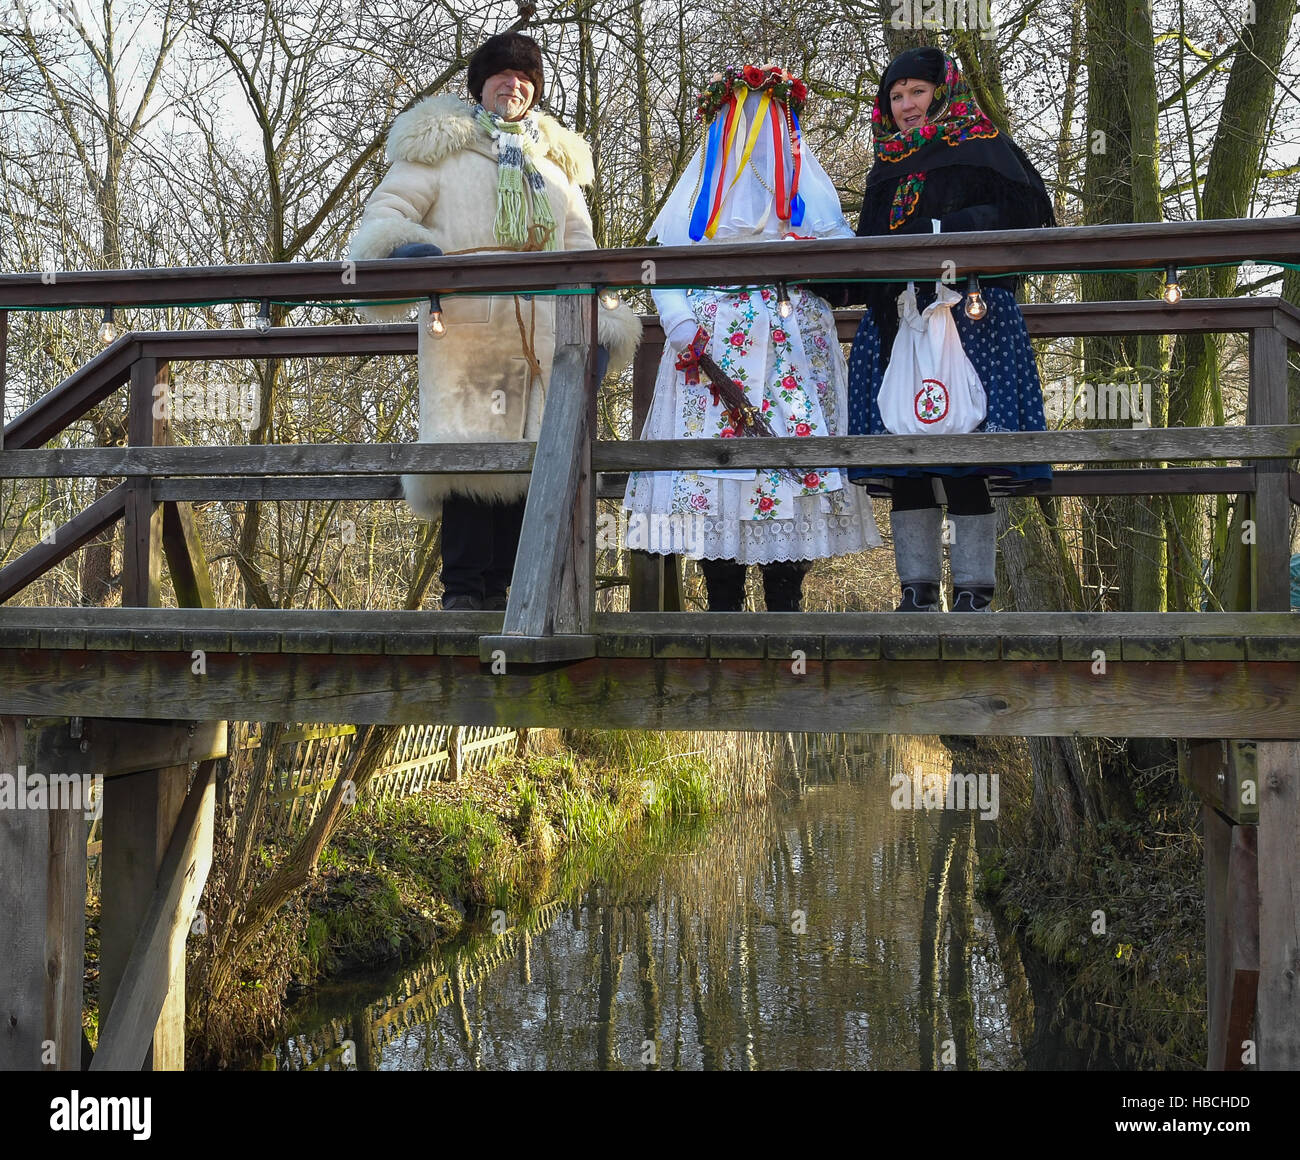 Lehde, Germany. 3rd Dec, 2016. The so-called Bescherkind (c), following an old pre-Christmas Lusatian custom, with its companion, and Rumpodich, the Knecht Ruprecht (approx. Santa's little helper) of the Spreewald region, pictured on a bridge over a stream at the Freilandmuseum in the Spreewald village of Lehde, Germany, 3 December 2016. Visitors can visit the Christmas Market by barge and learn about the customs and traditions of the Spreewald's inhabitants. Photo: Patrick Pleul/dpa-Zentralbild/ZB/dpa/Alamy Live News Stock Photo